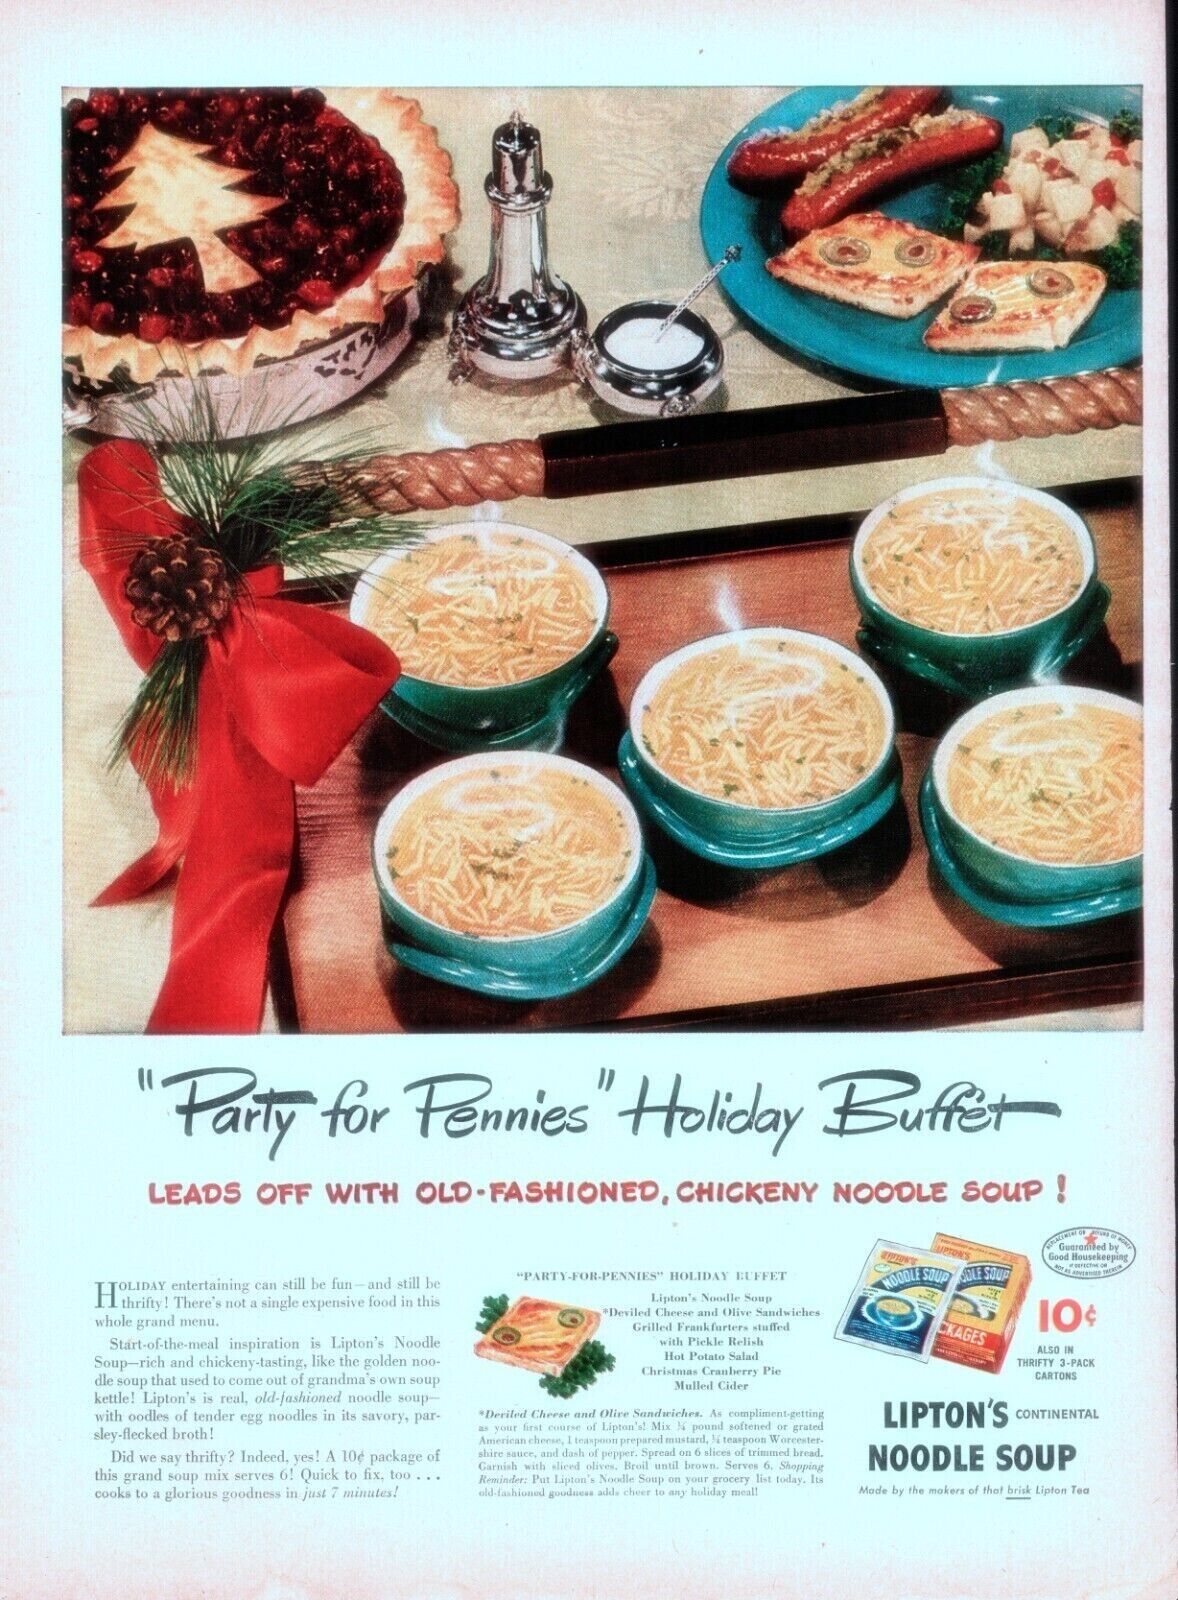 1945 Lipton's Noodle Soup Vintage Print Ad Party For Pennies Holiday Buffet